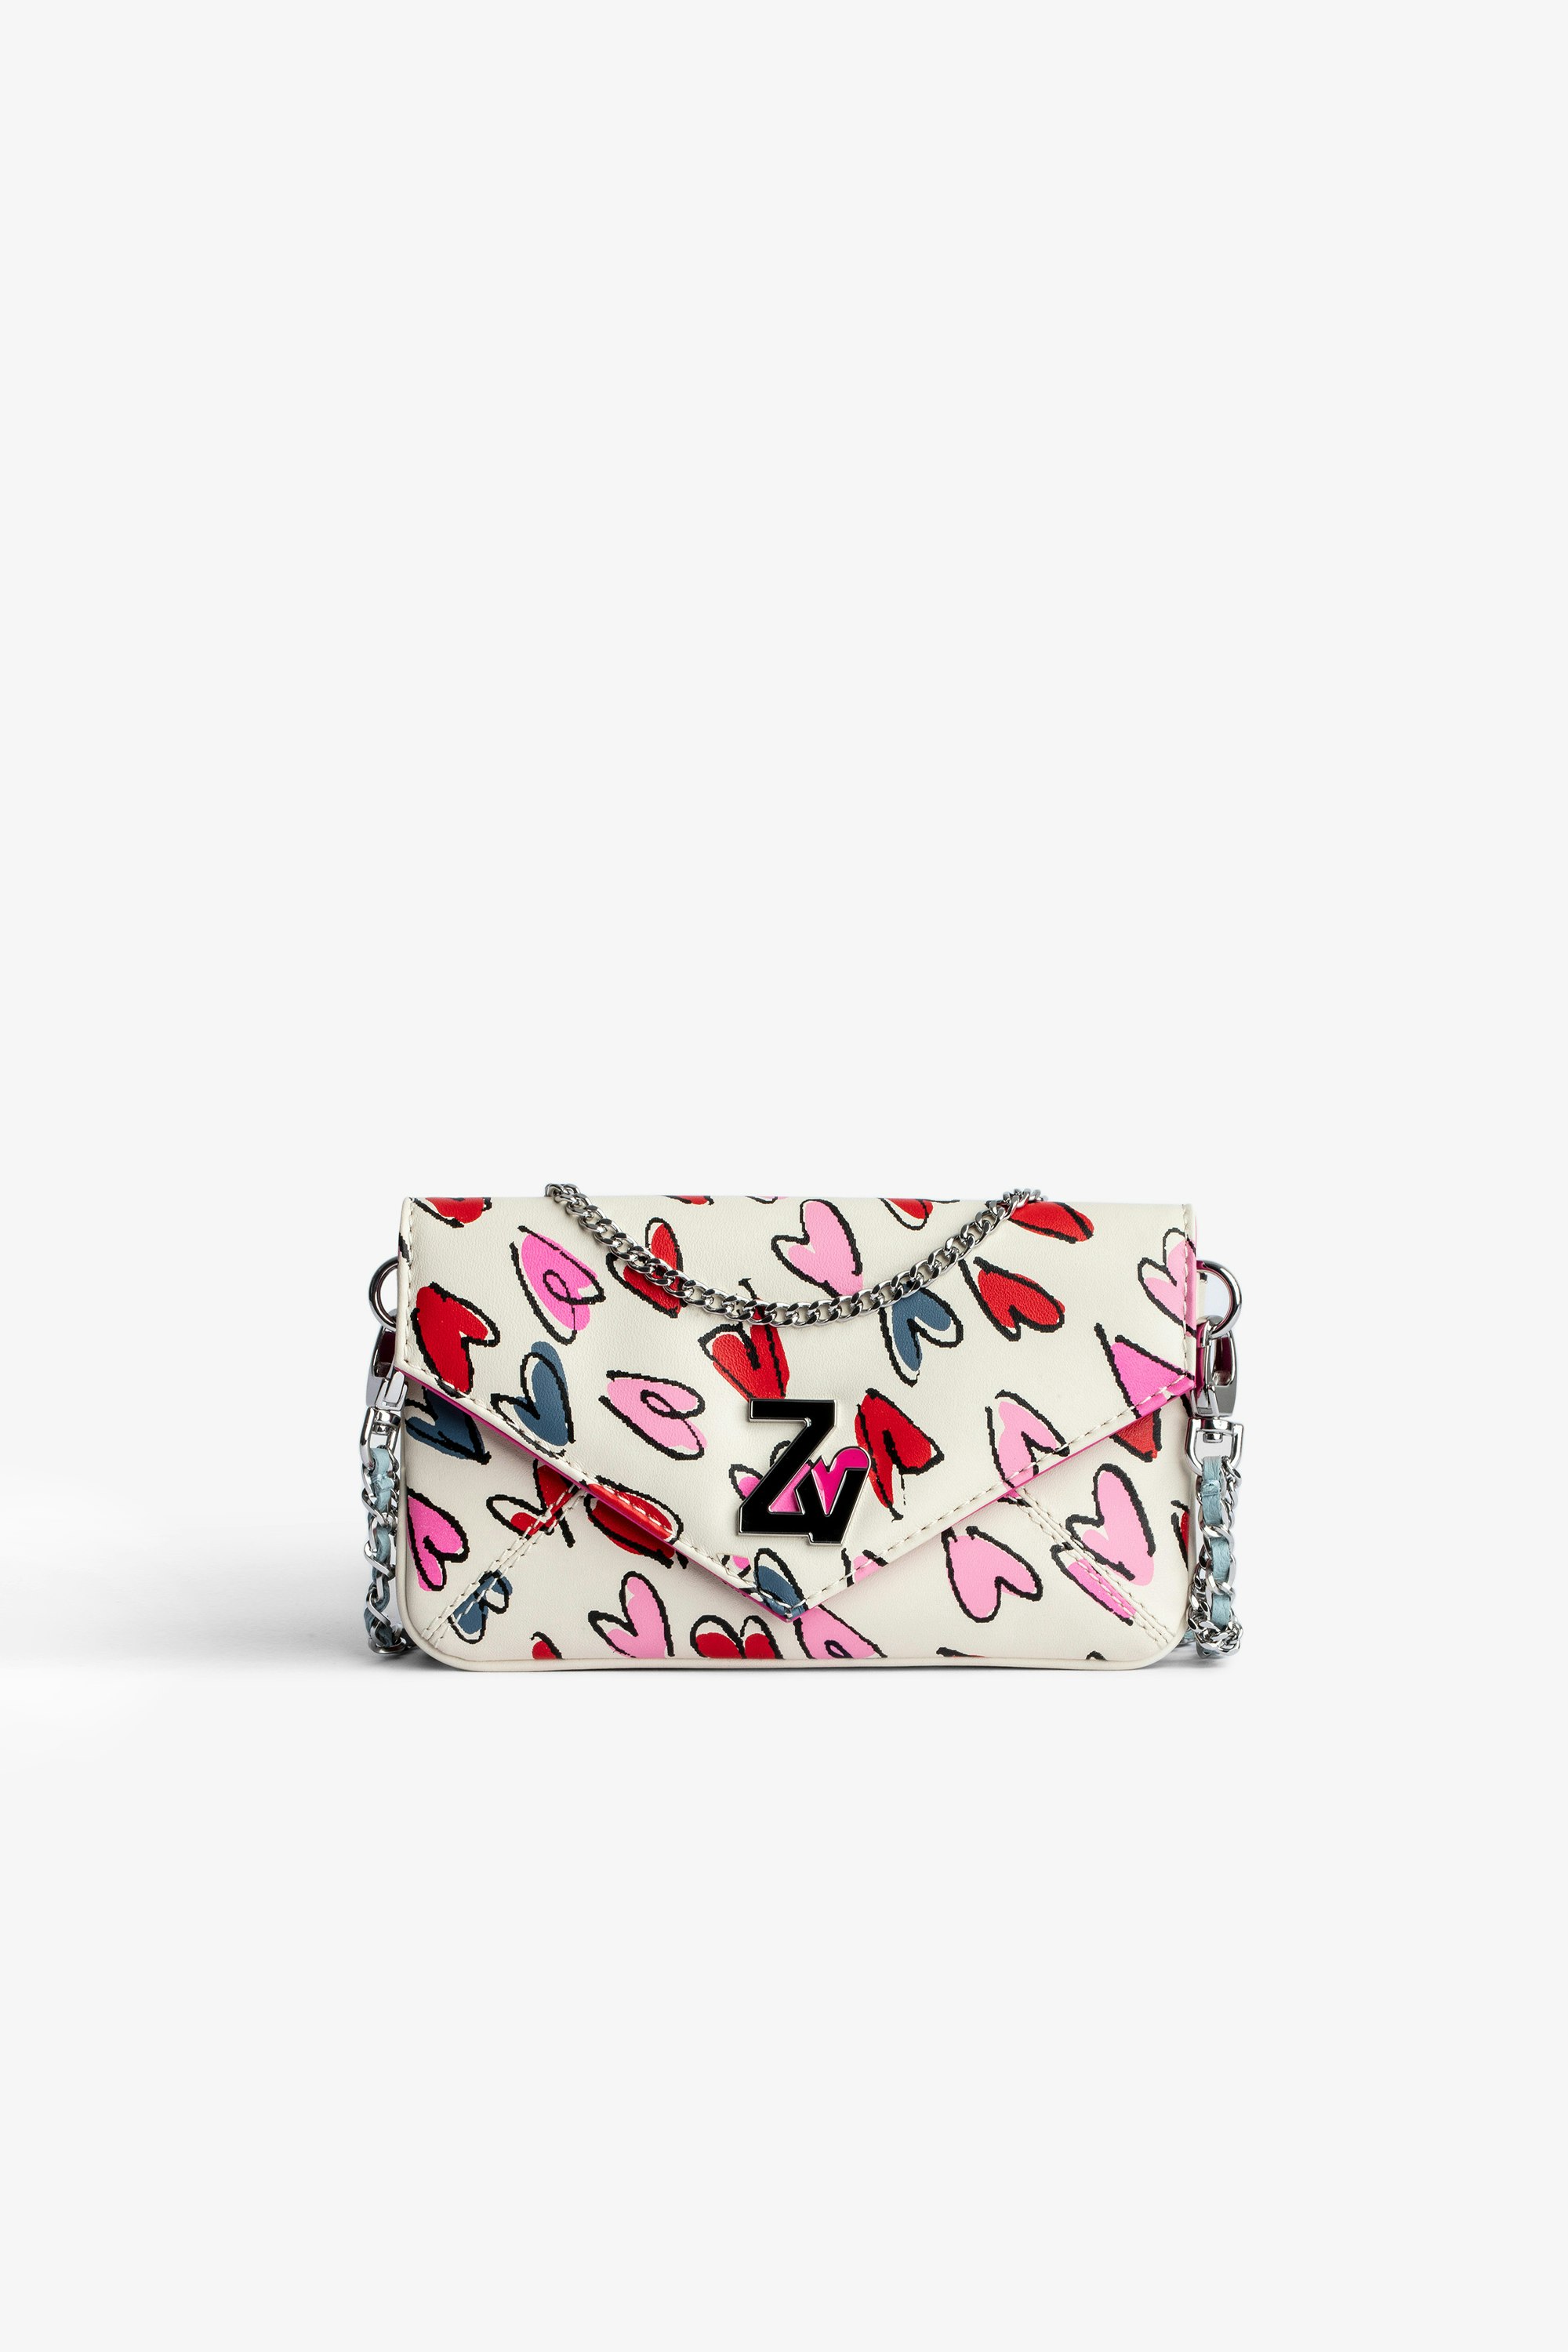 Rockeur Nano Clutch Women’s clutch in white leather featuring red and pink hearts